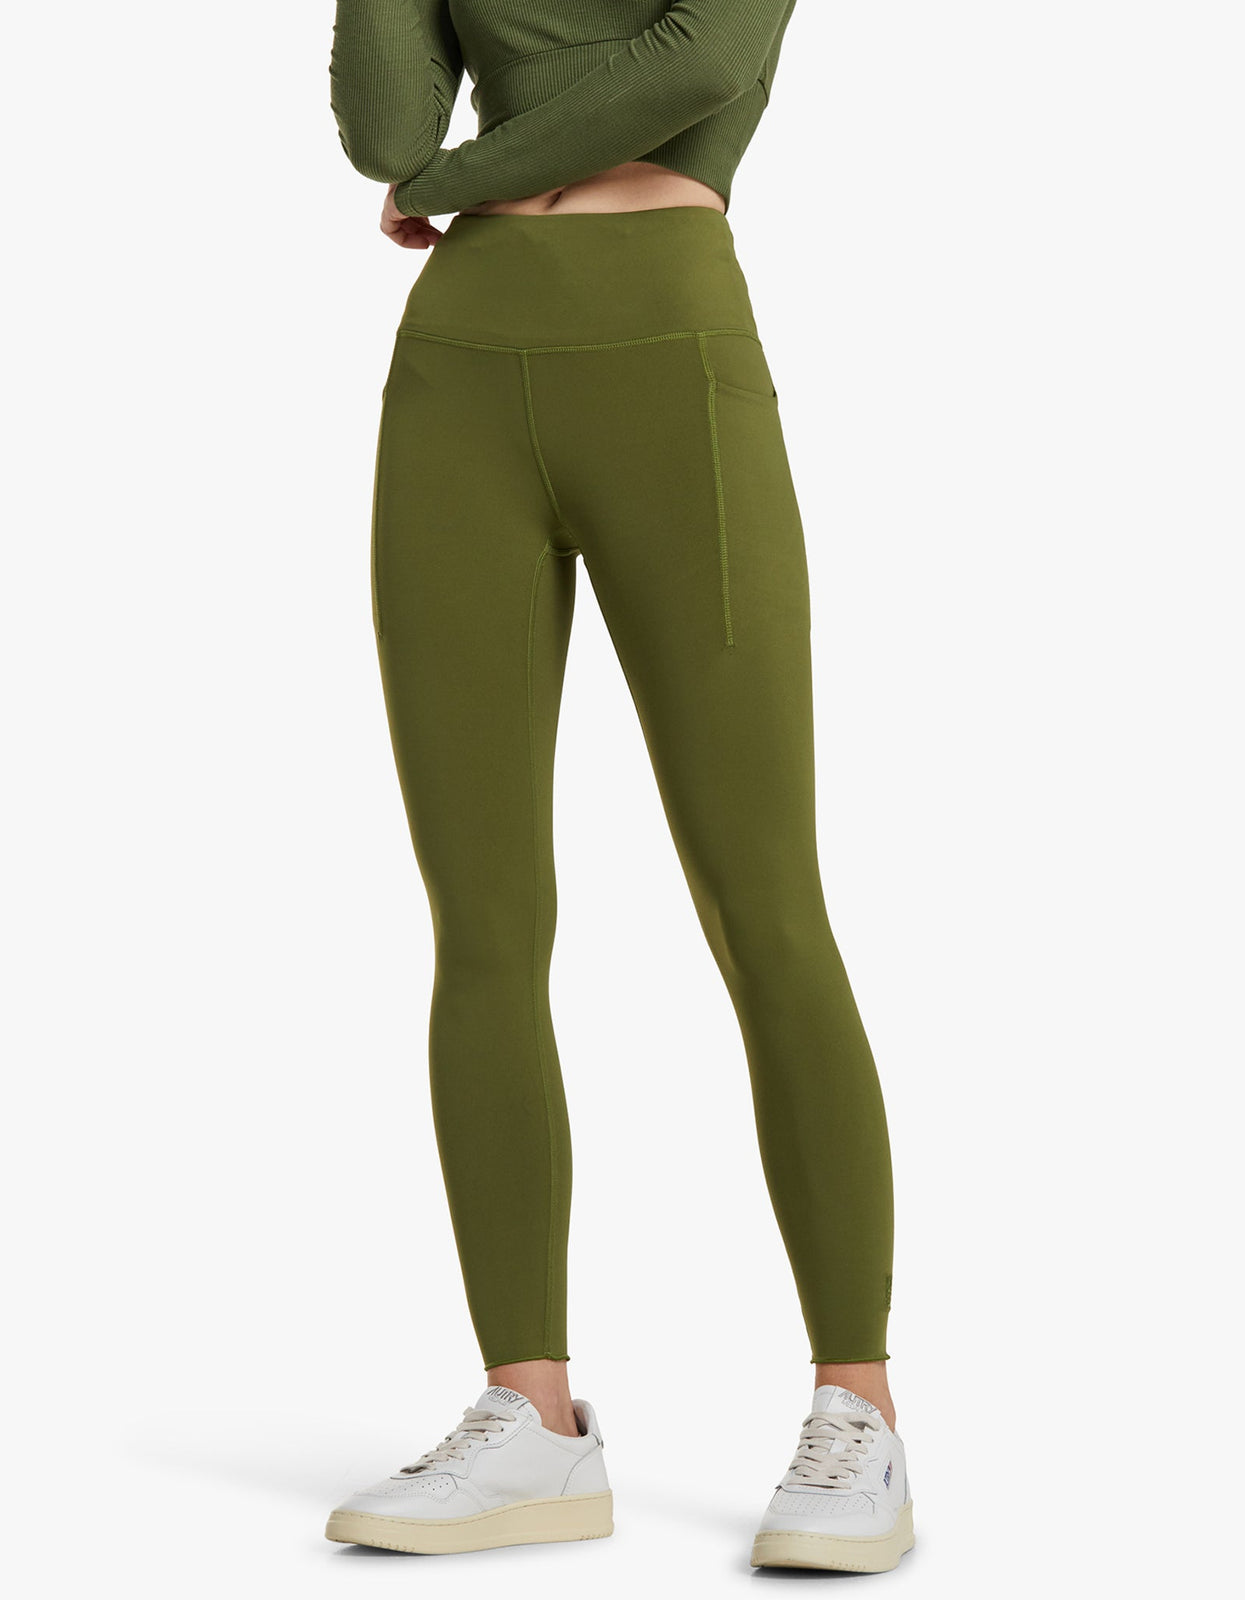 Fabletics Camo Leggings Green - $9 - From Riley